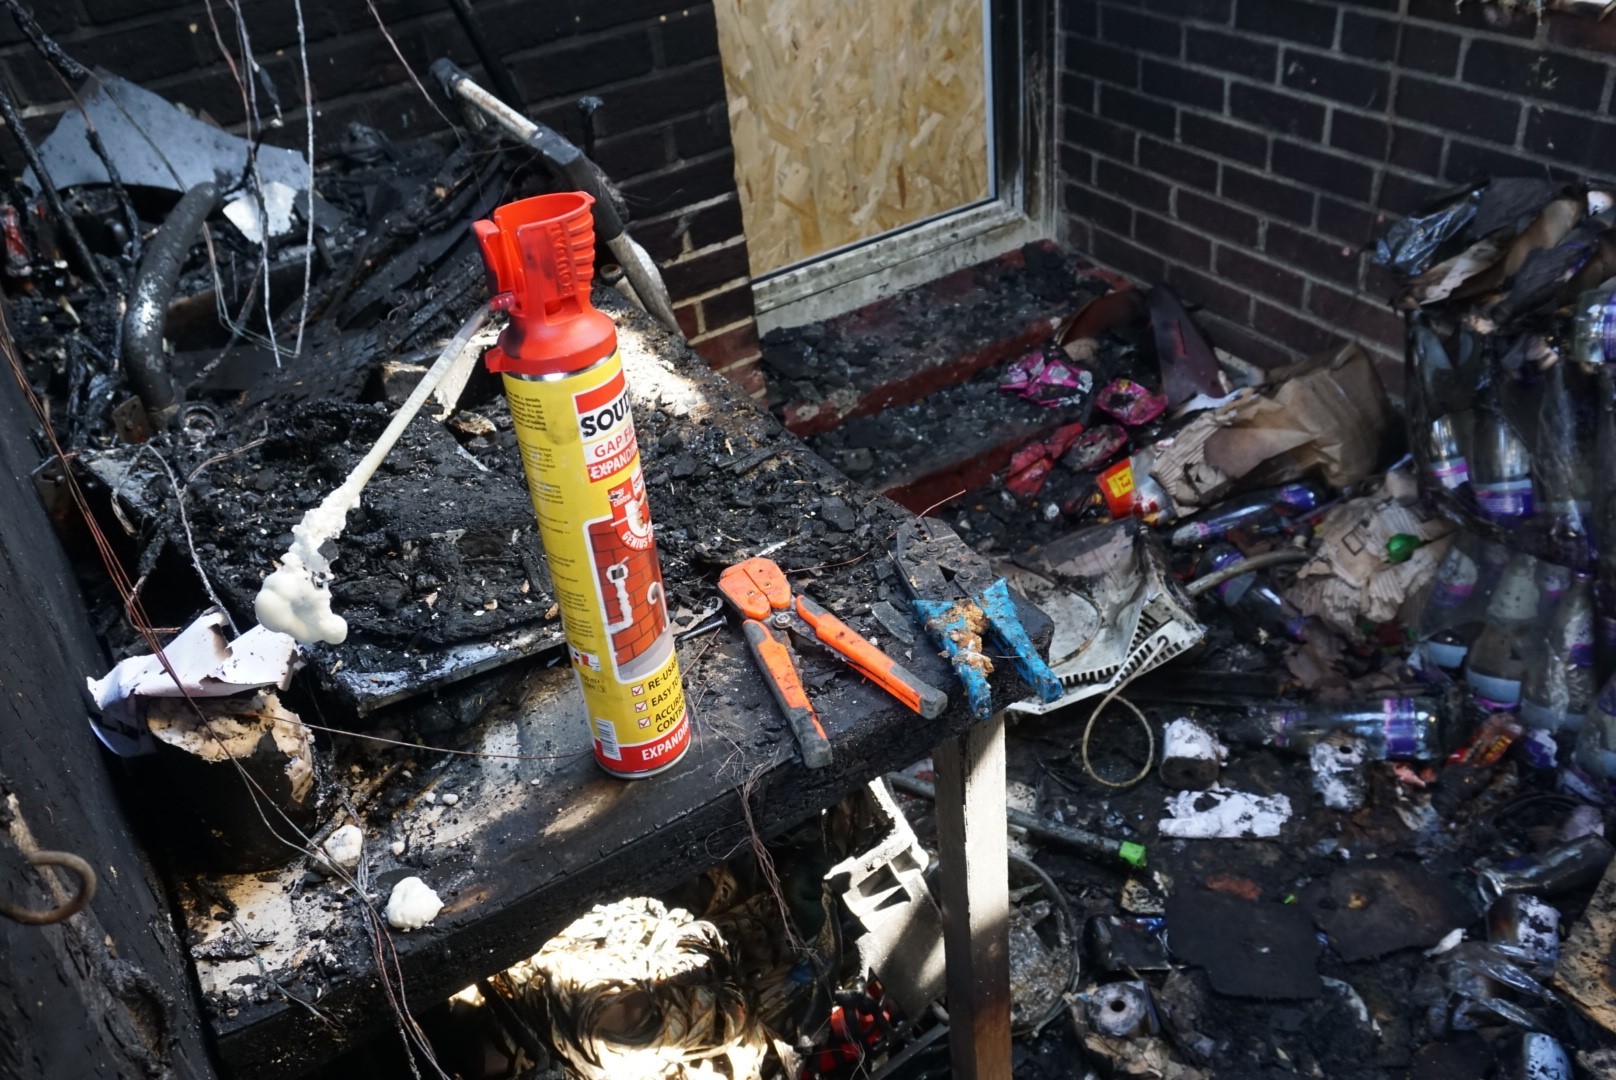 A fire gutted the Bradpole Road post office and convenience store in Bournemouth in the early hours of Saturday April 17 2021. Pictures: Greg Luckhurst